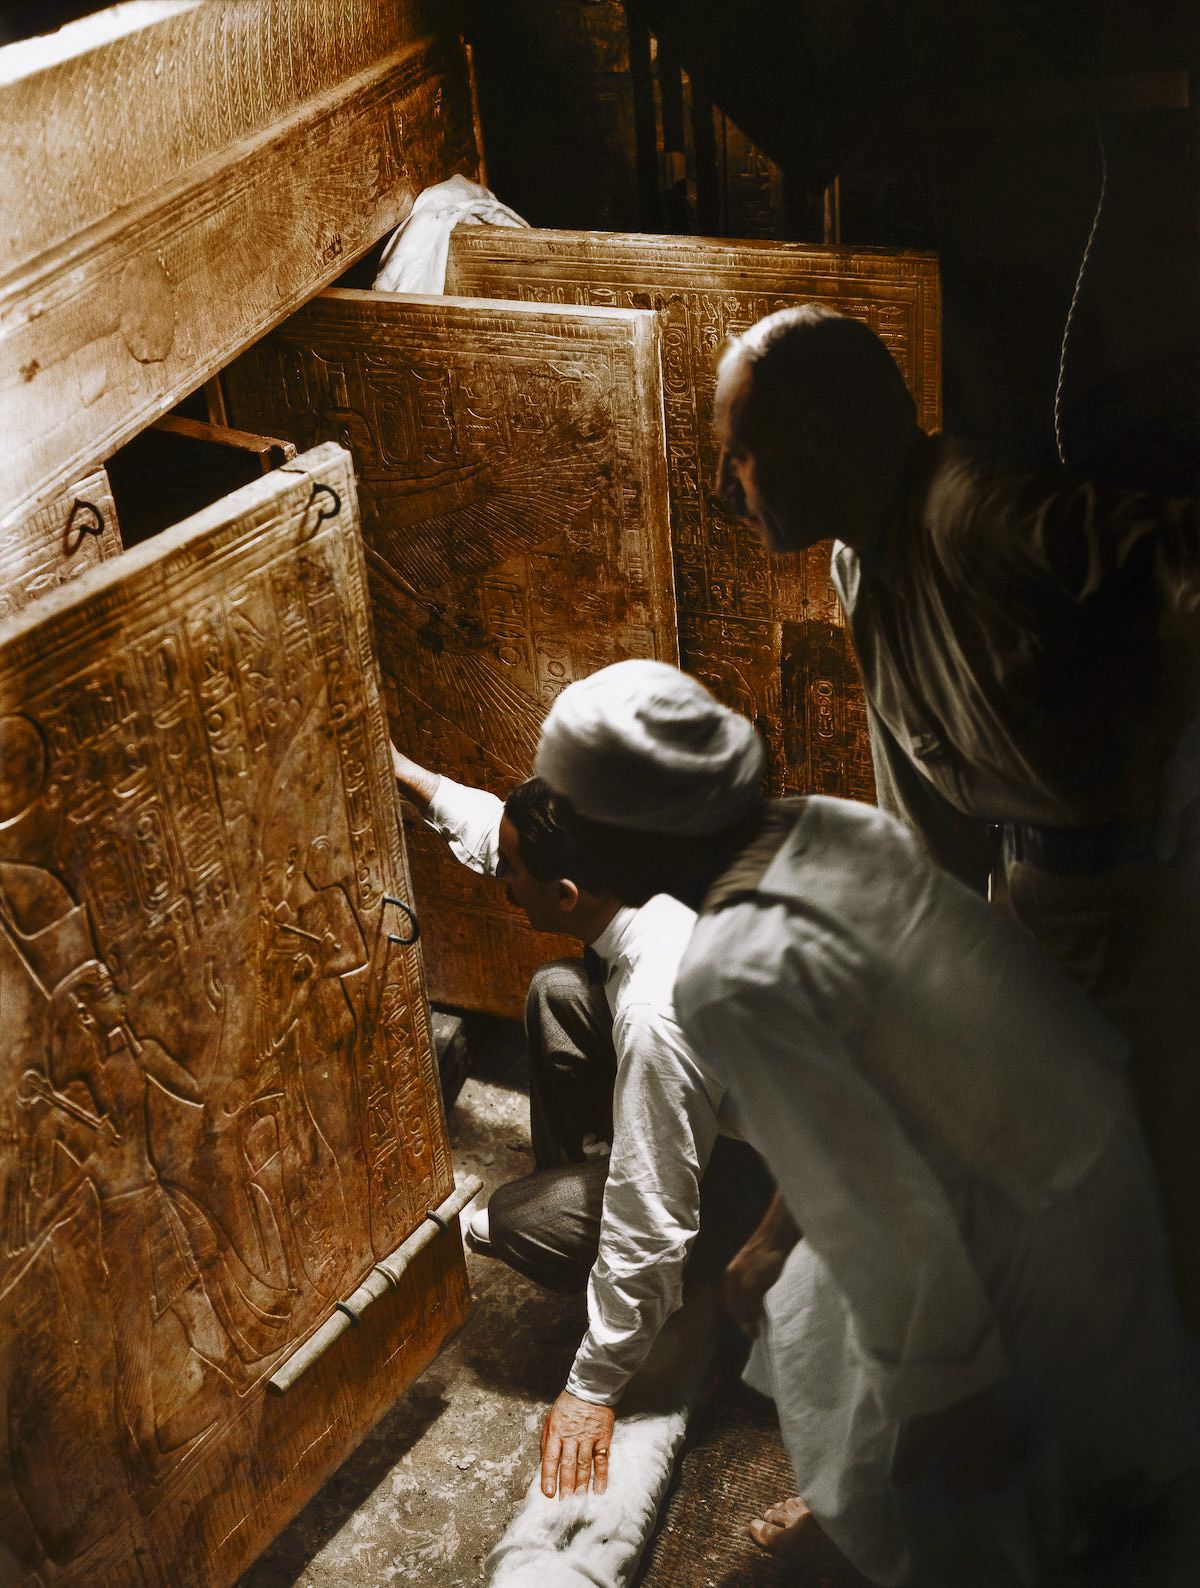 Howard Carter (center) looking inside an Egyptian tomb, colorized by Dynamichrome.